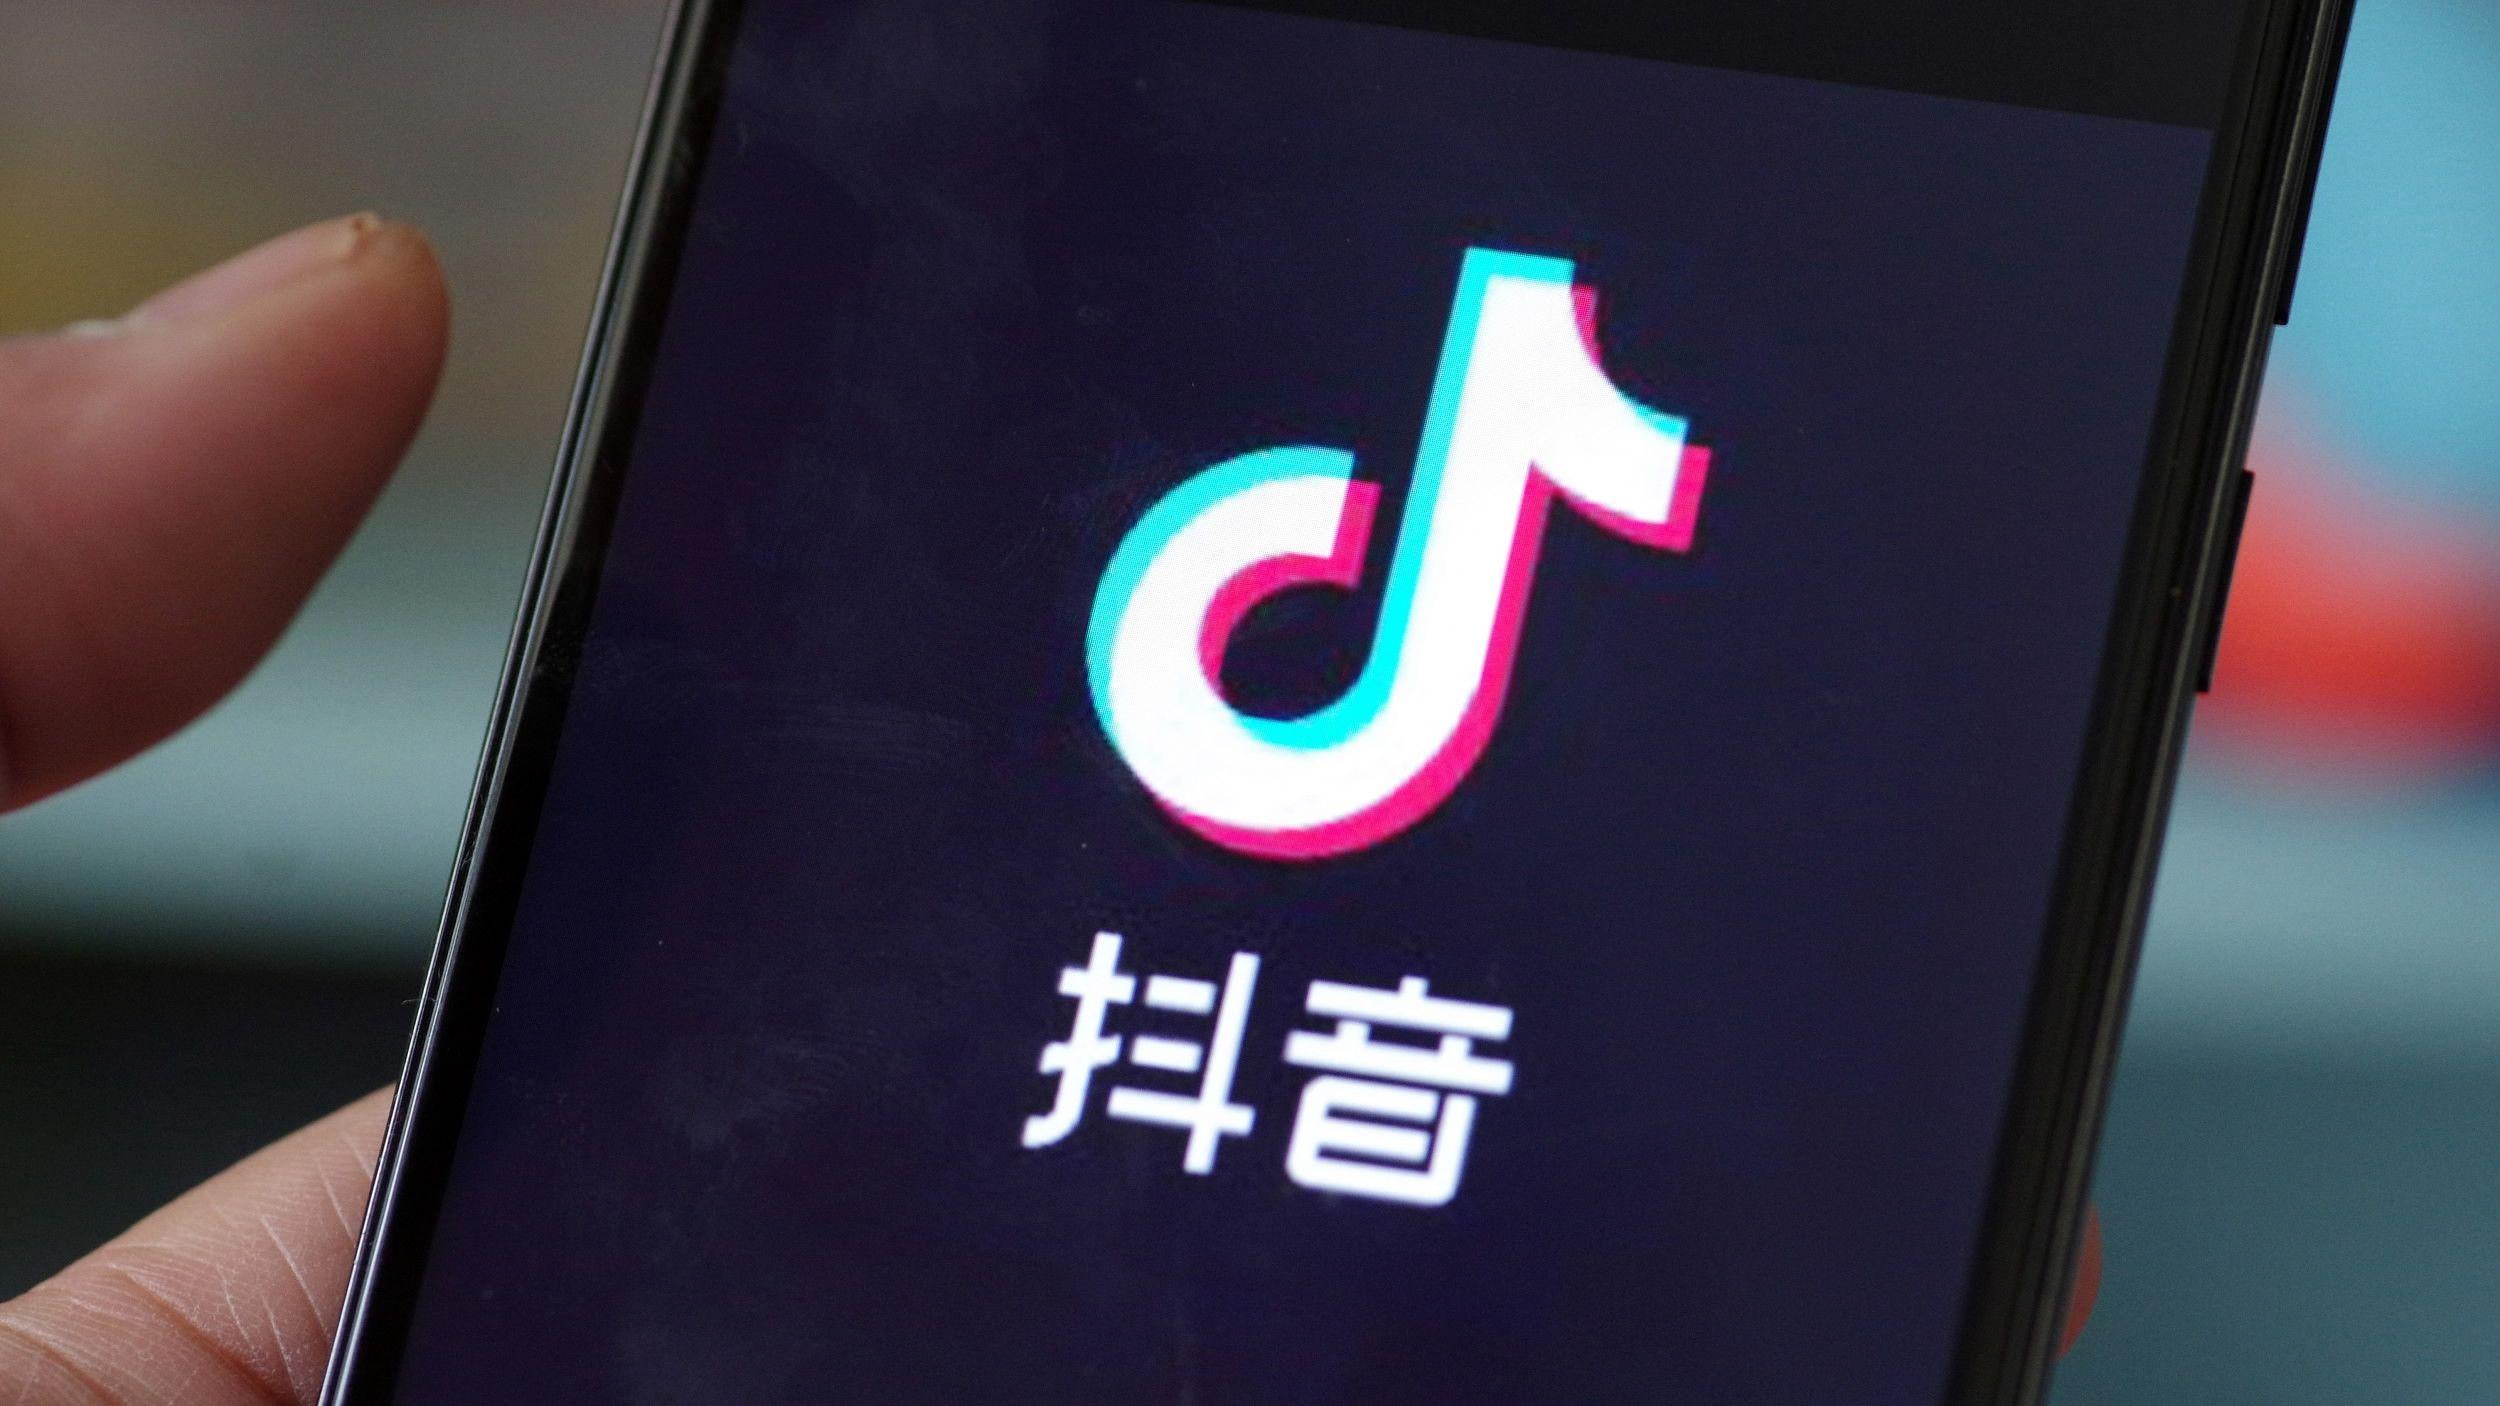 China’s Tik Tok ‘world’s most downloaded app’ in first quarter